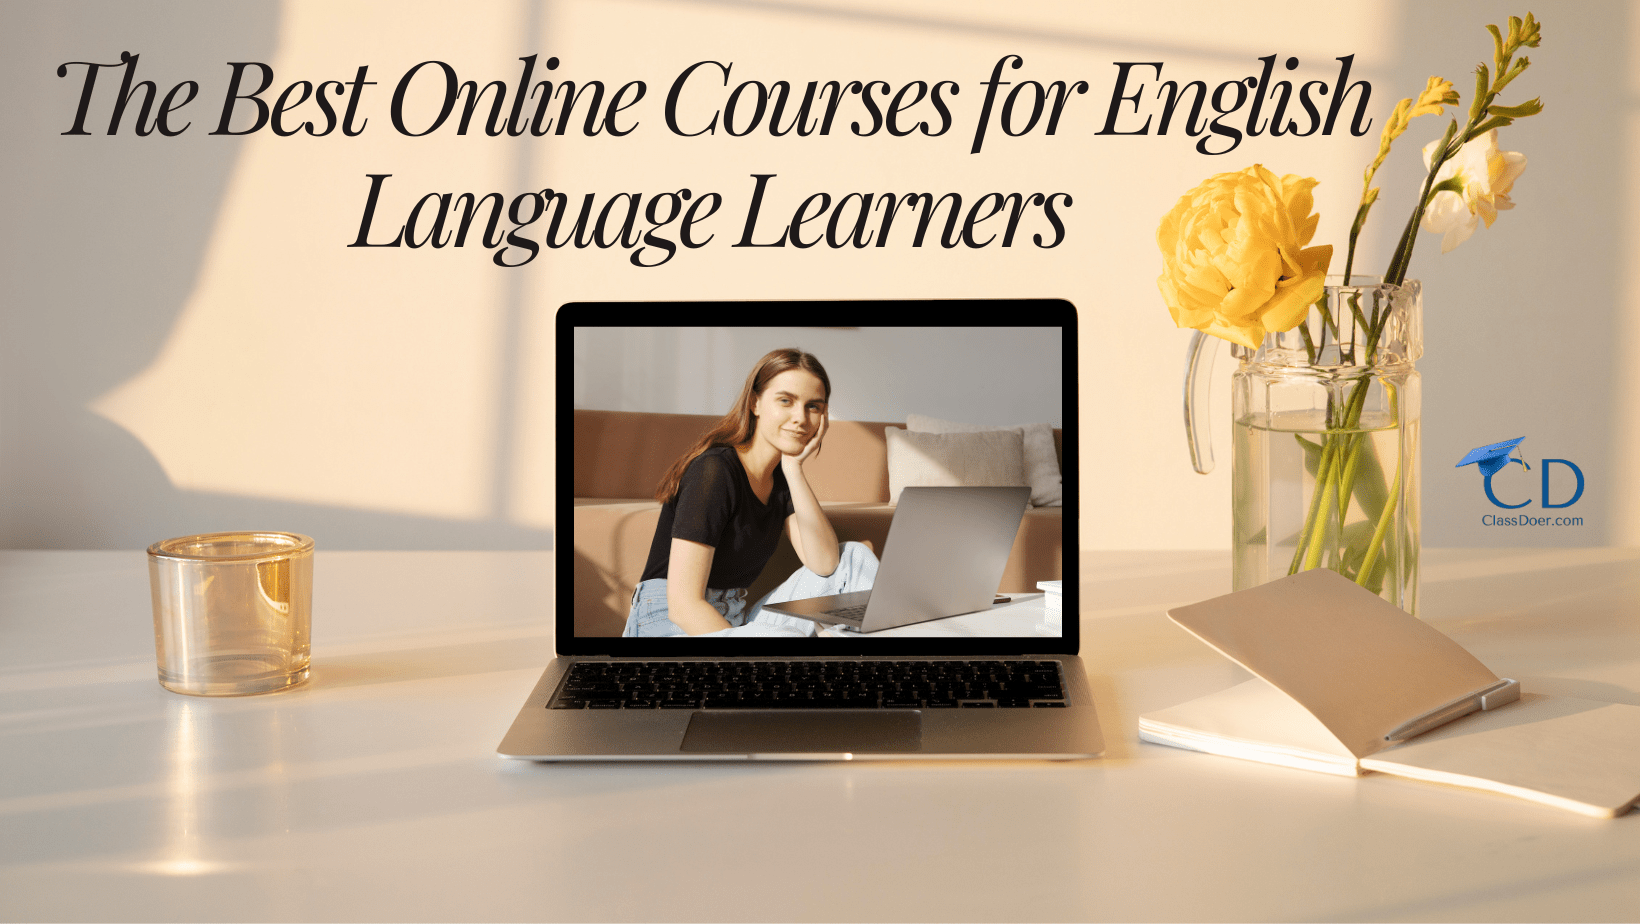  The Best Online Courses for English Language Learners